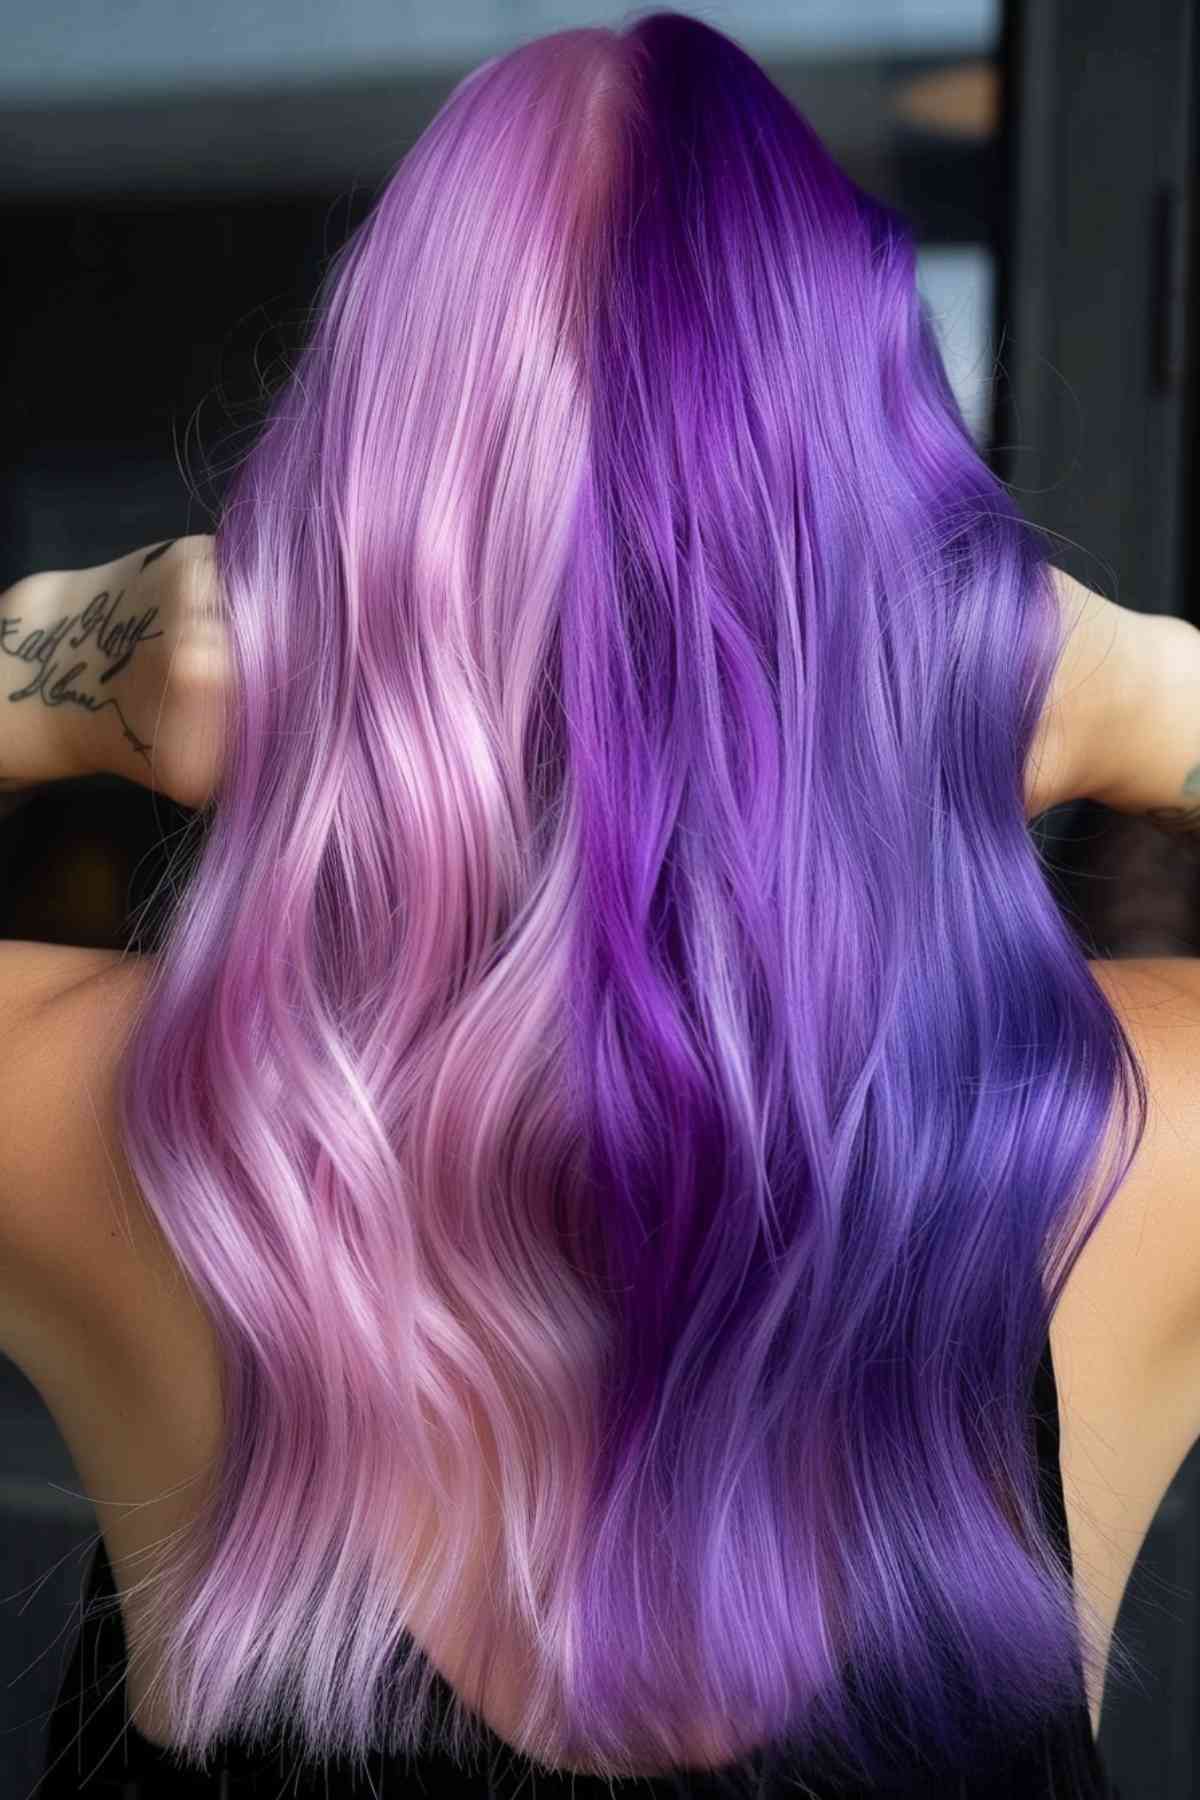 Wavy, mid-back length hair with a gradient of purple to lilac, embodying Gemini's dynamic essence.